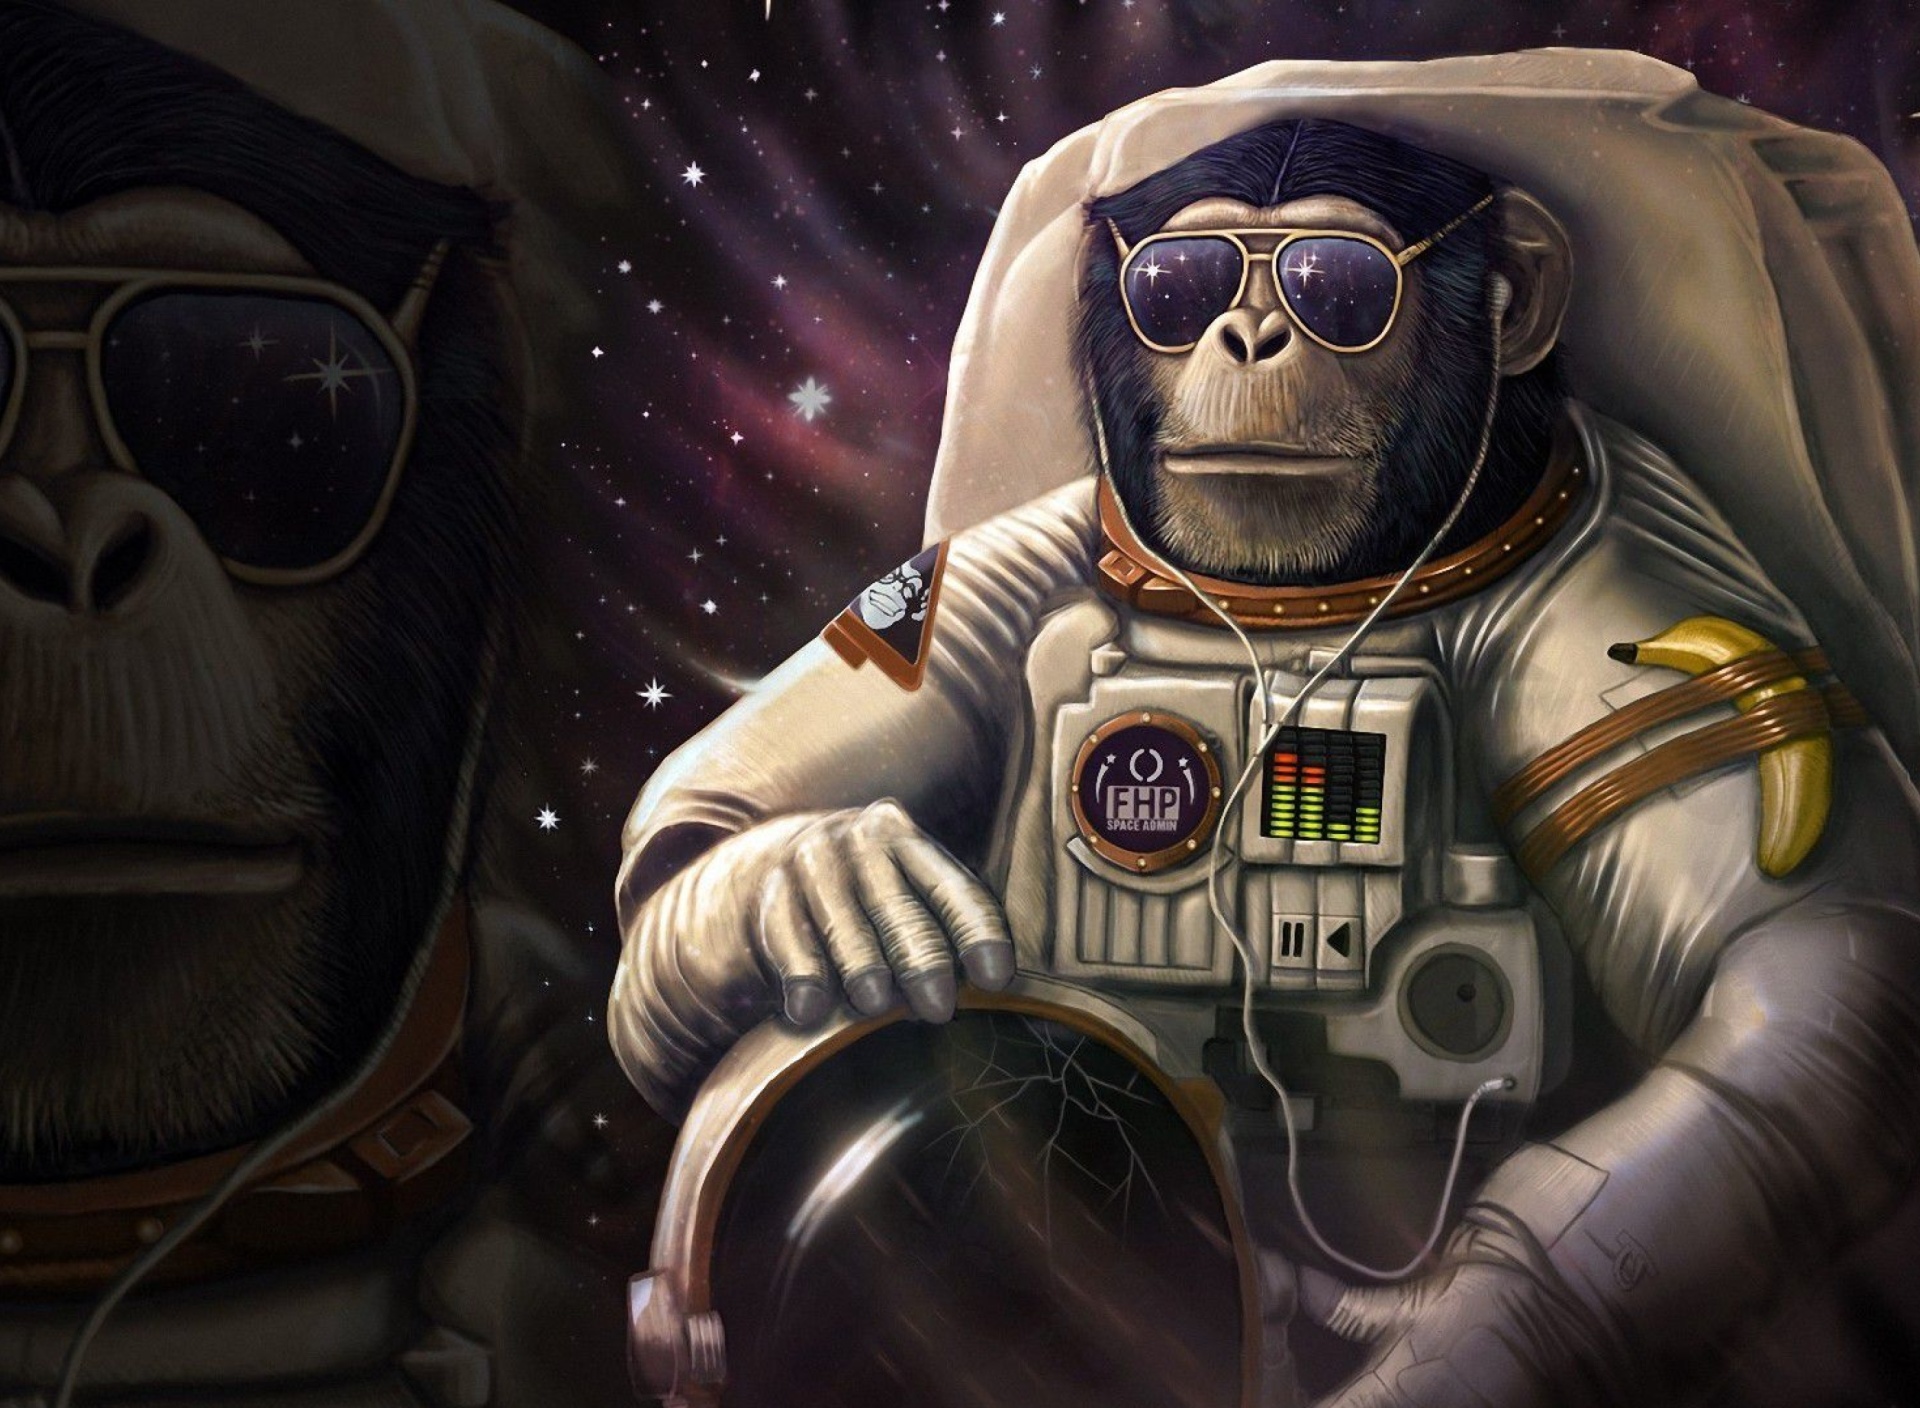 Monkeys and apes in space screenshot #1 1920x1408